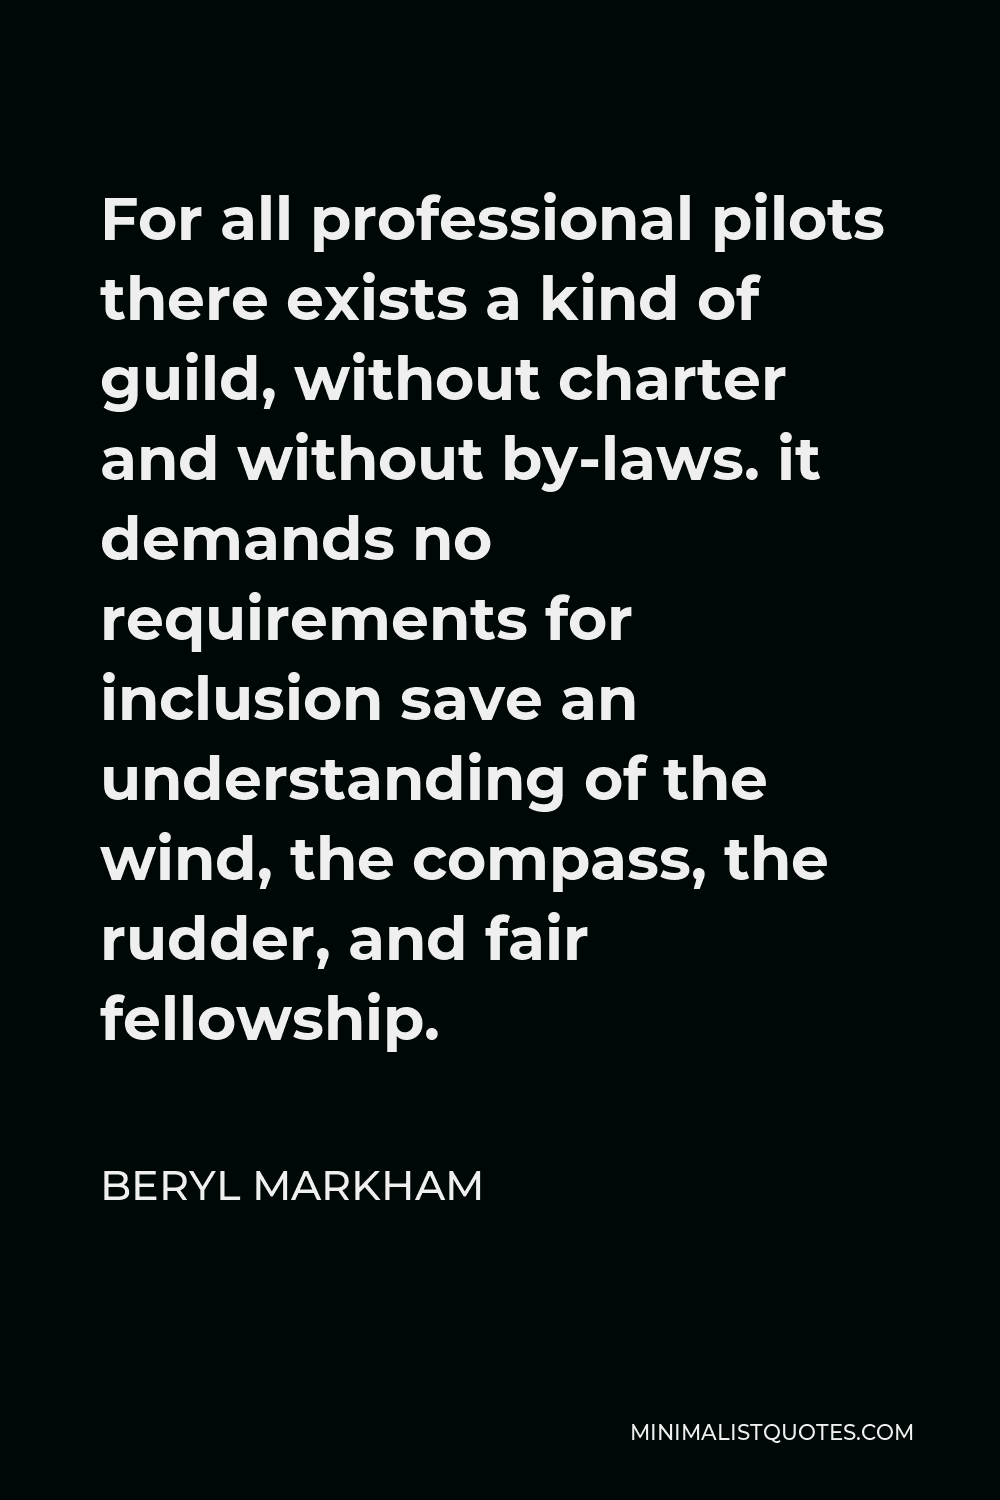 Beryl Markham Quote - For all professional pilots there exists a kind of guild, without charter and without by-laws. it demands no requirements for inclusion save an understanding of the wind, the compass, the rudder, and fair fellowship.